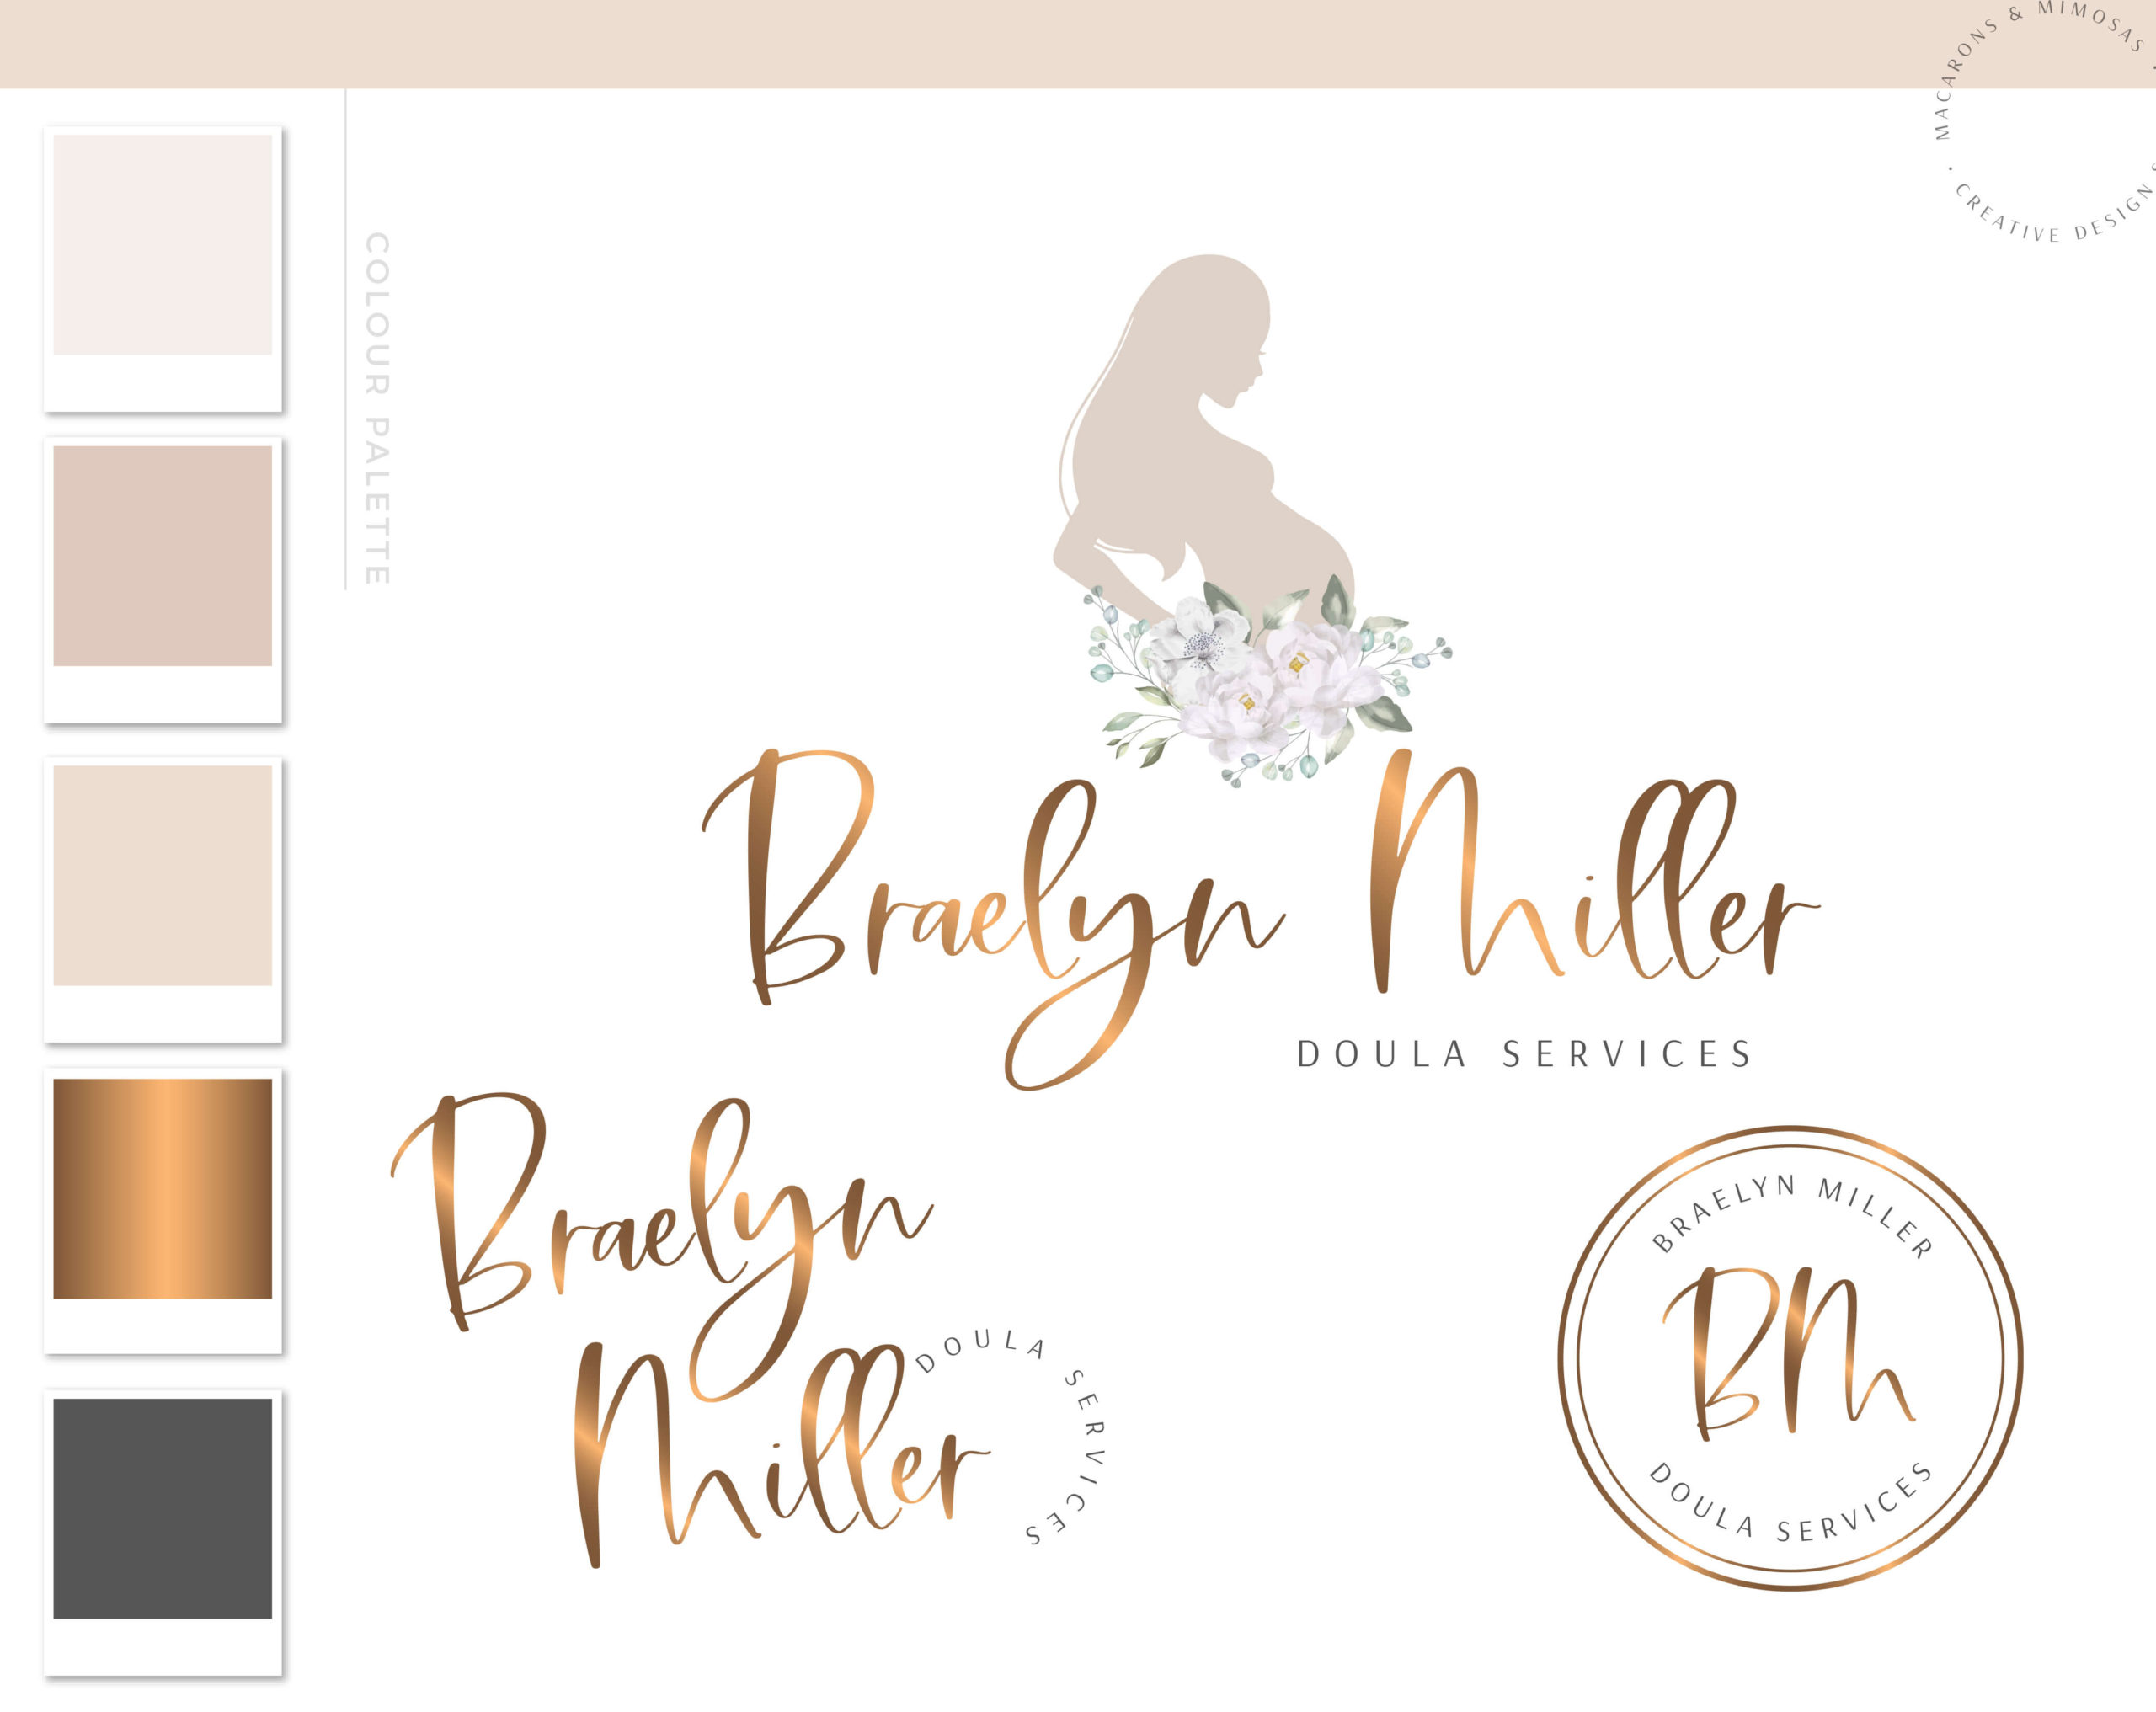 Doula logo, Floral Baby Birth Logo and Branding, Midwife Pregnancy Premade Branding Kit, Newborn Coaching and Maternity Watermark Package